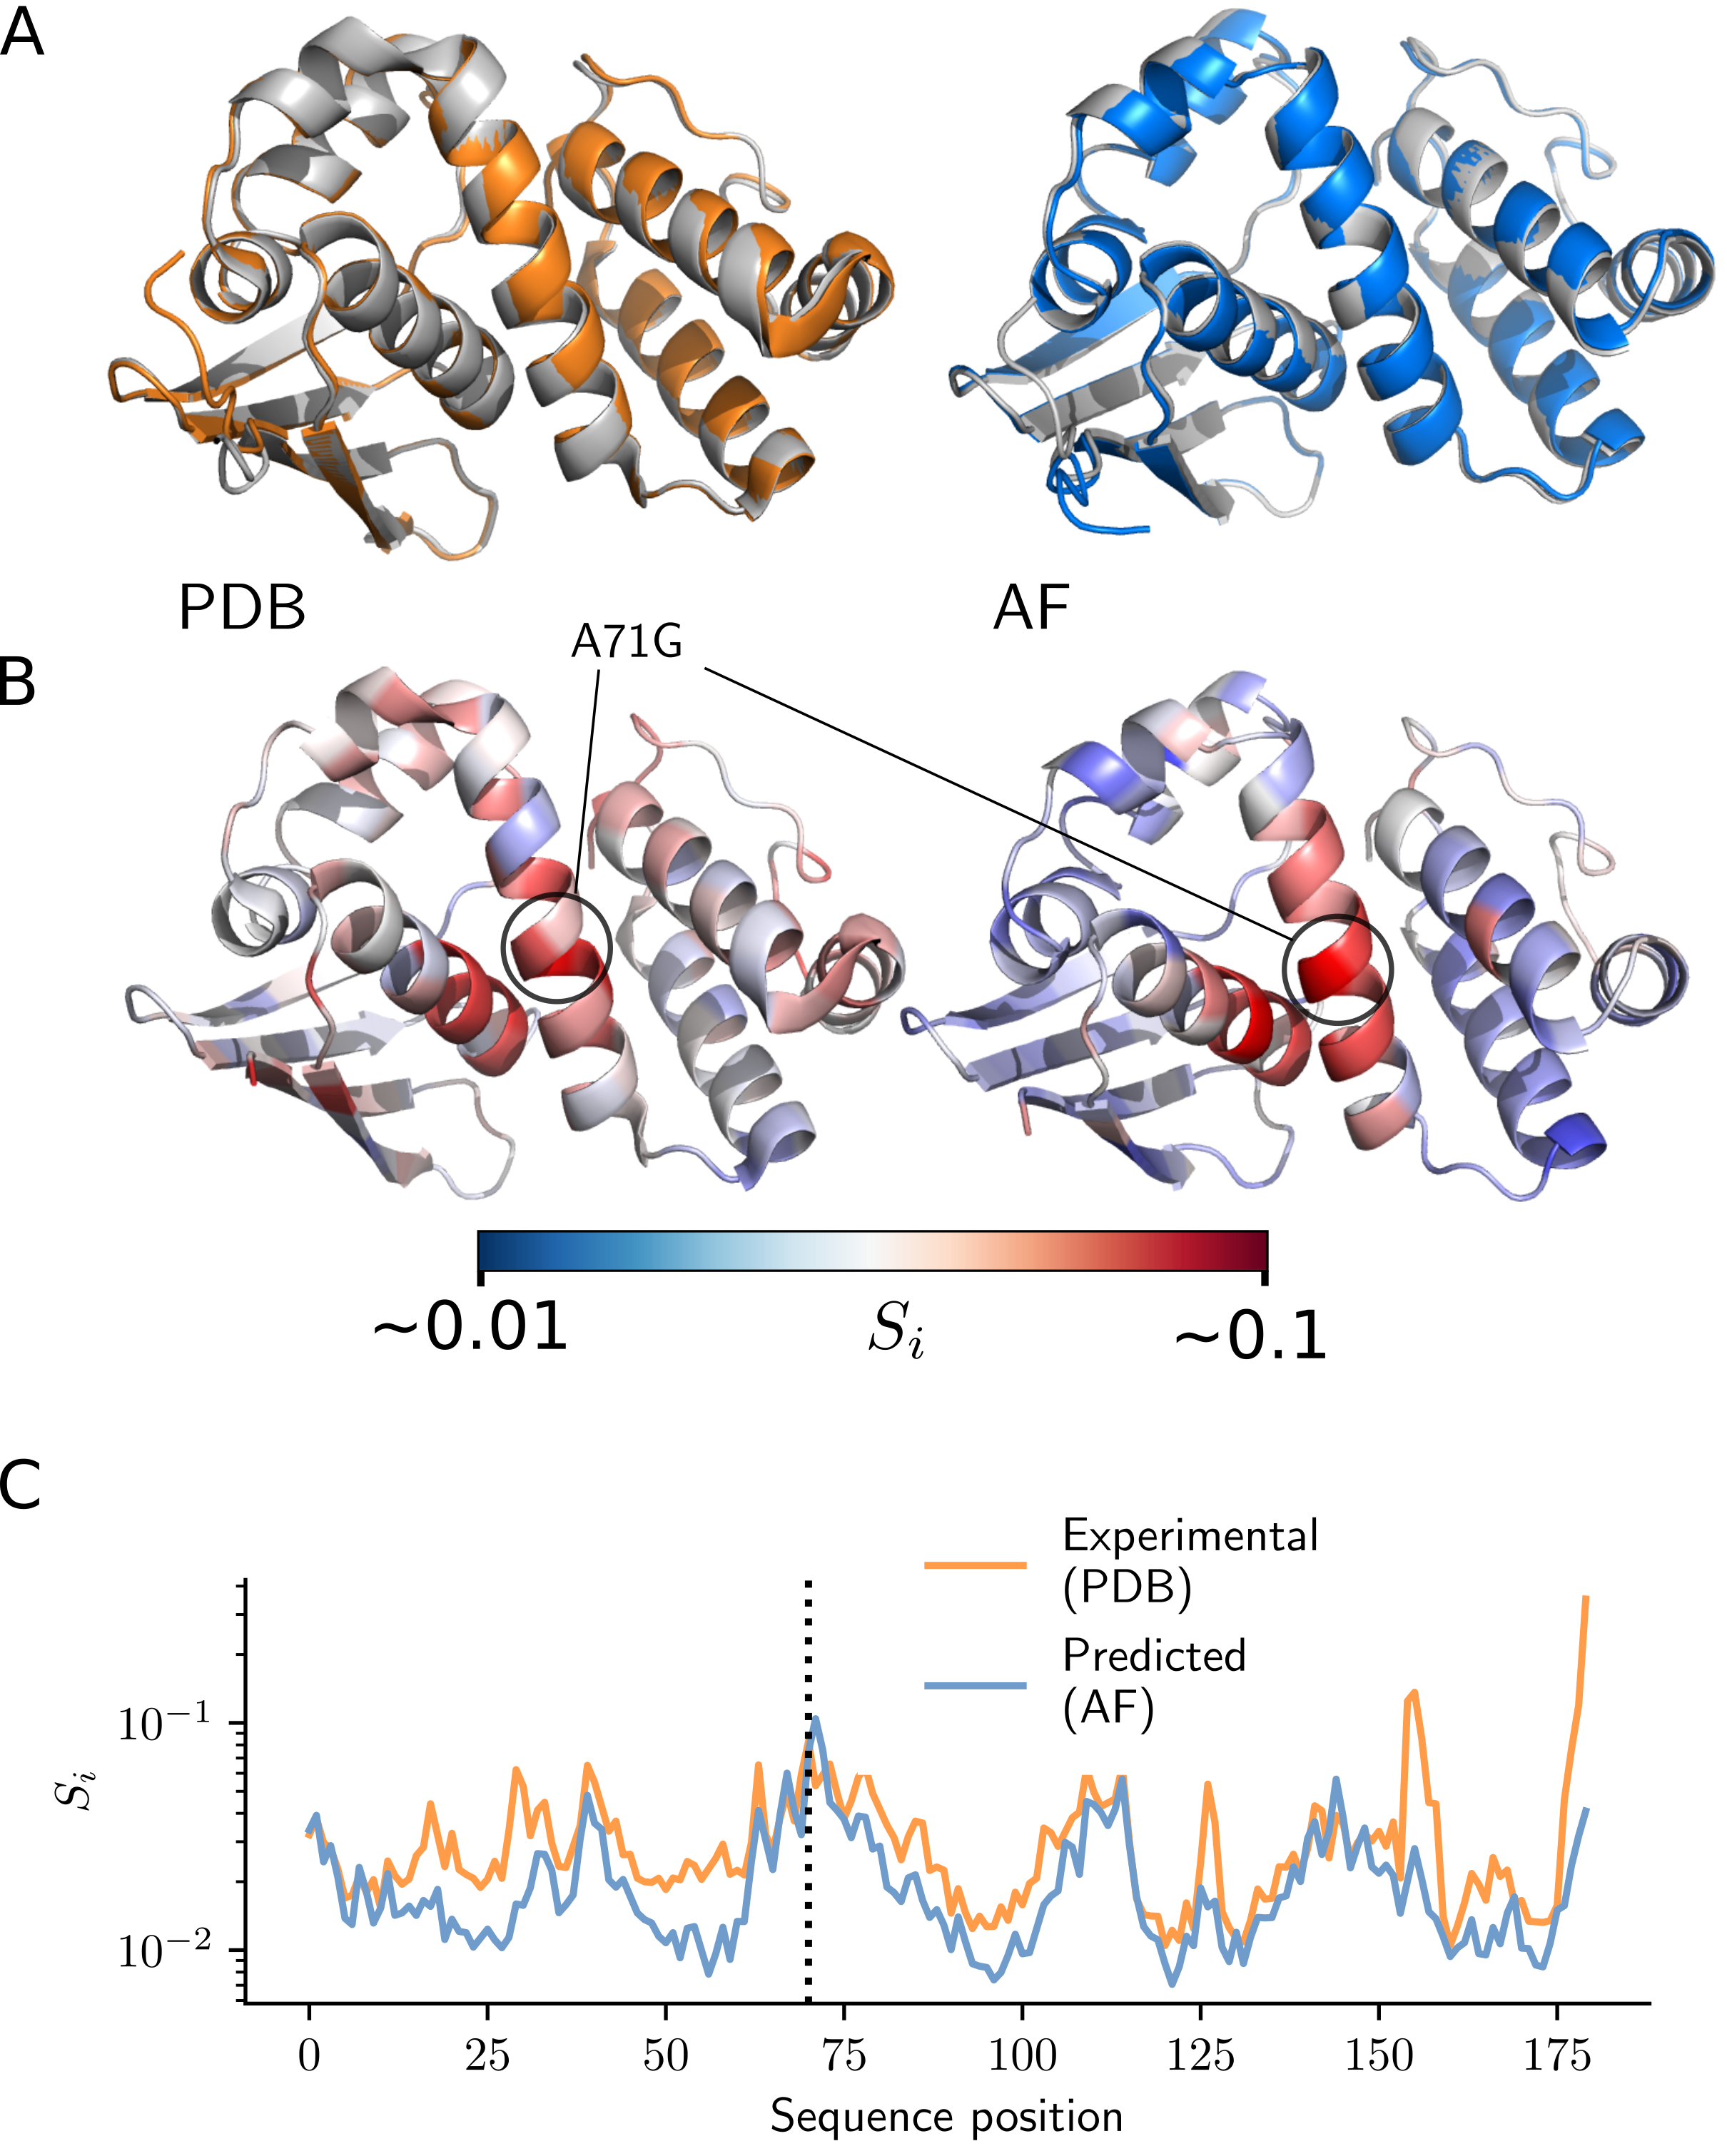 Overlaid wild-type (grey) and mutant (color), experimental (orange), and predicted (blue) structures of H-NOX protein.